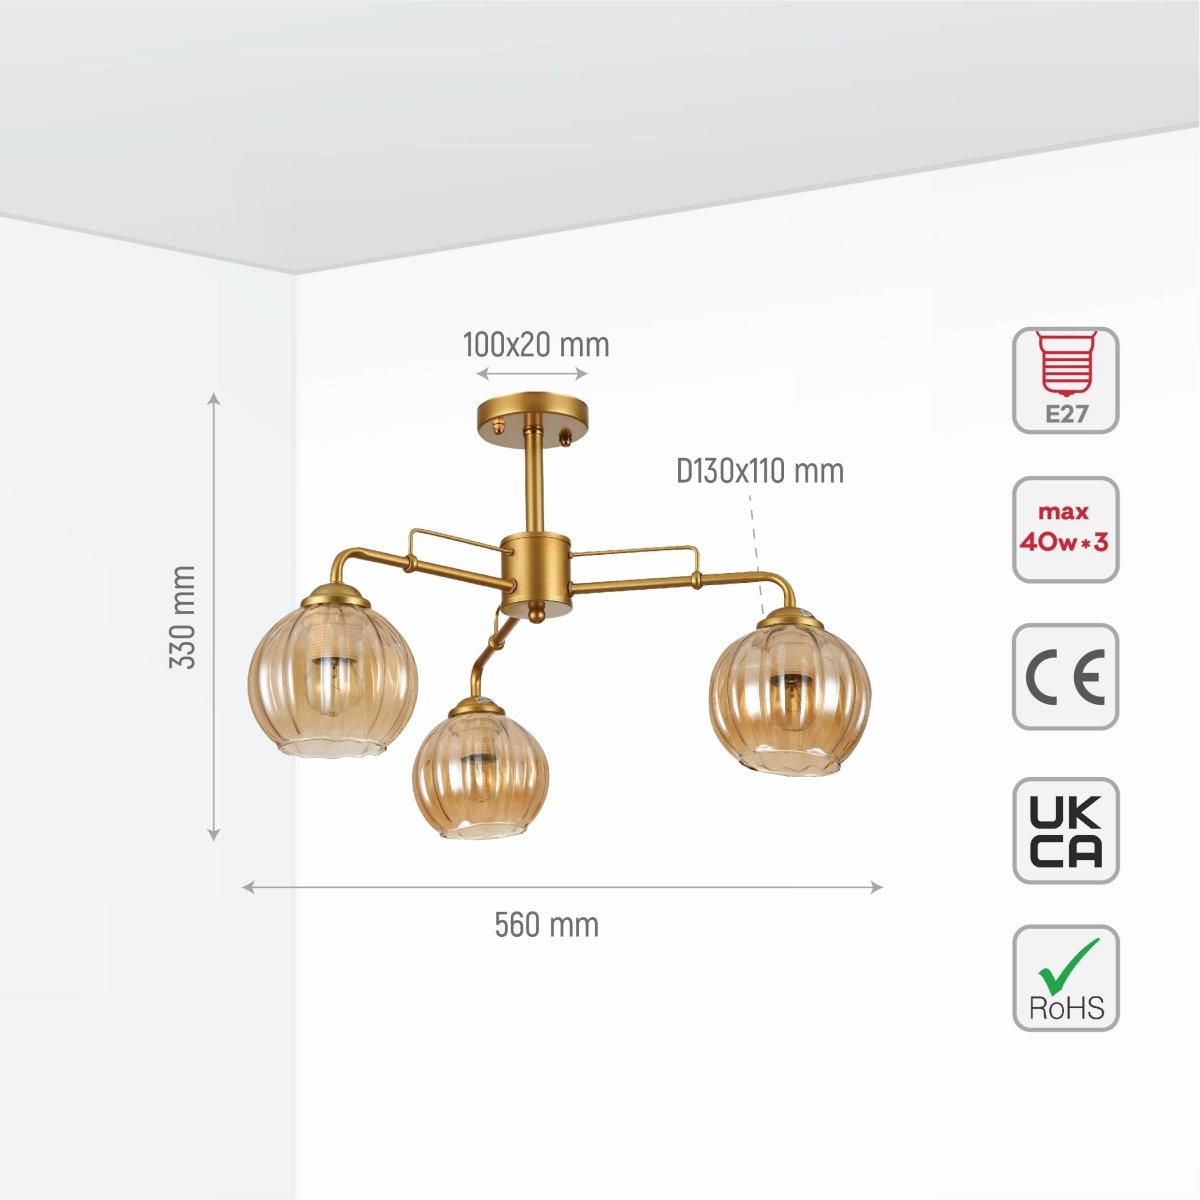 Size and specs of Amber Reeded Globe Glass Gold Metal Industrial Vintage Retro Semi Flush Ceiling Light with E27 Fittings | TEKLED 159-17652